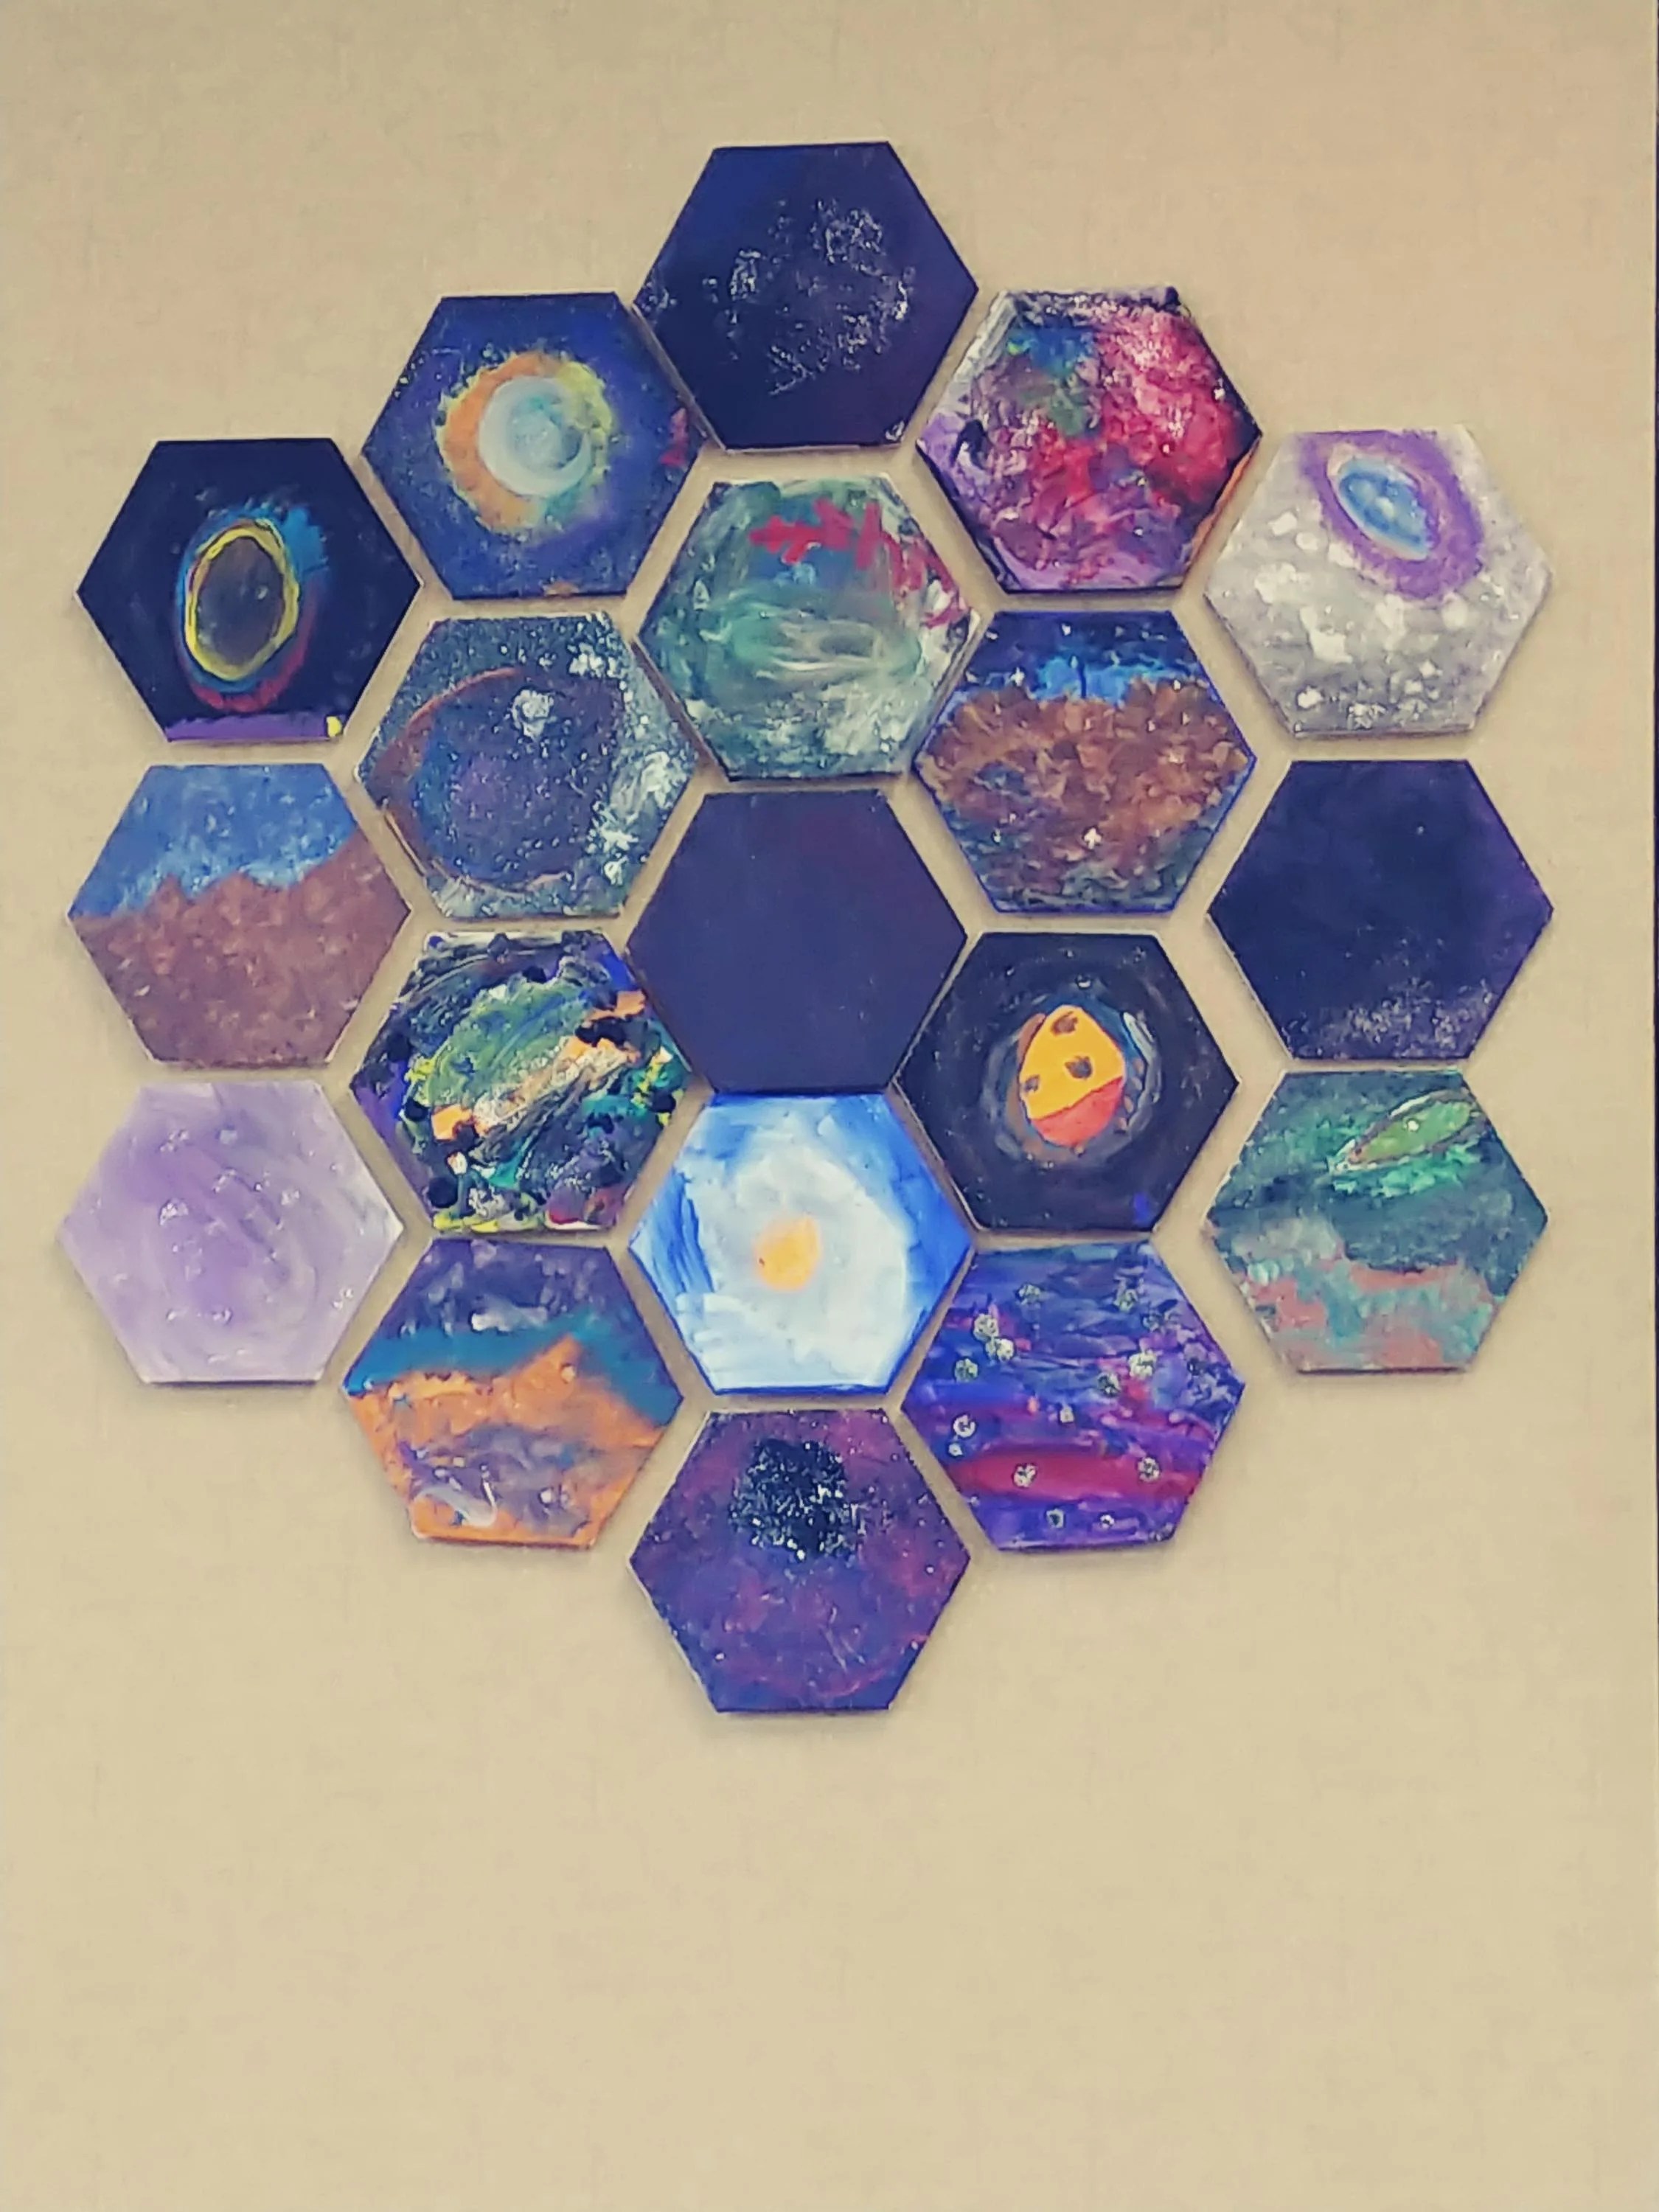 19 small canvas hexagons are arranged in one large hexagon similar in share to the James Webb Space Telescope Mirror handing on a wall. Each individual hexagon is different with swirls of blue, white, purple, red, gray depict galaxies, nebulas, and other space elements.